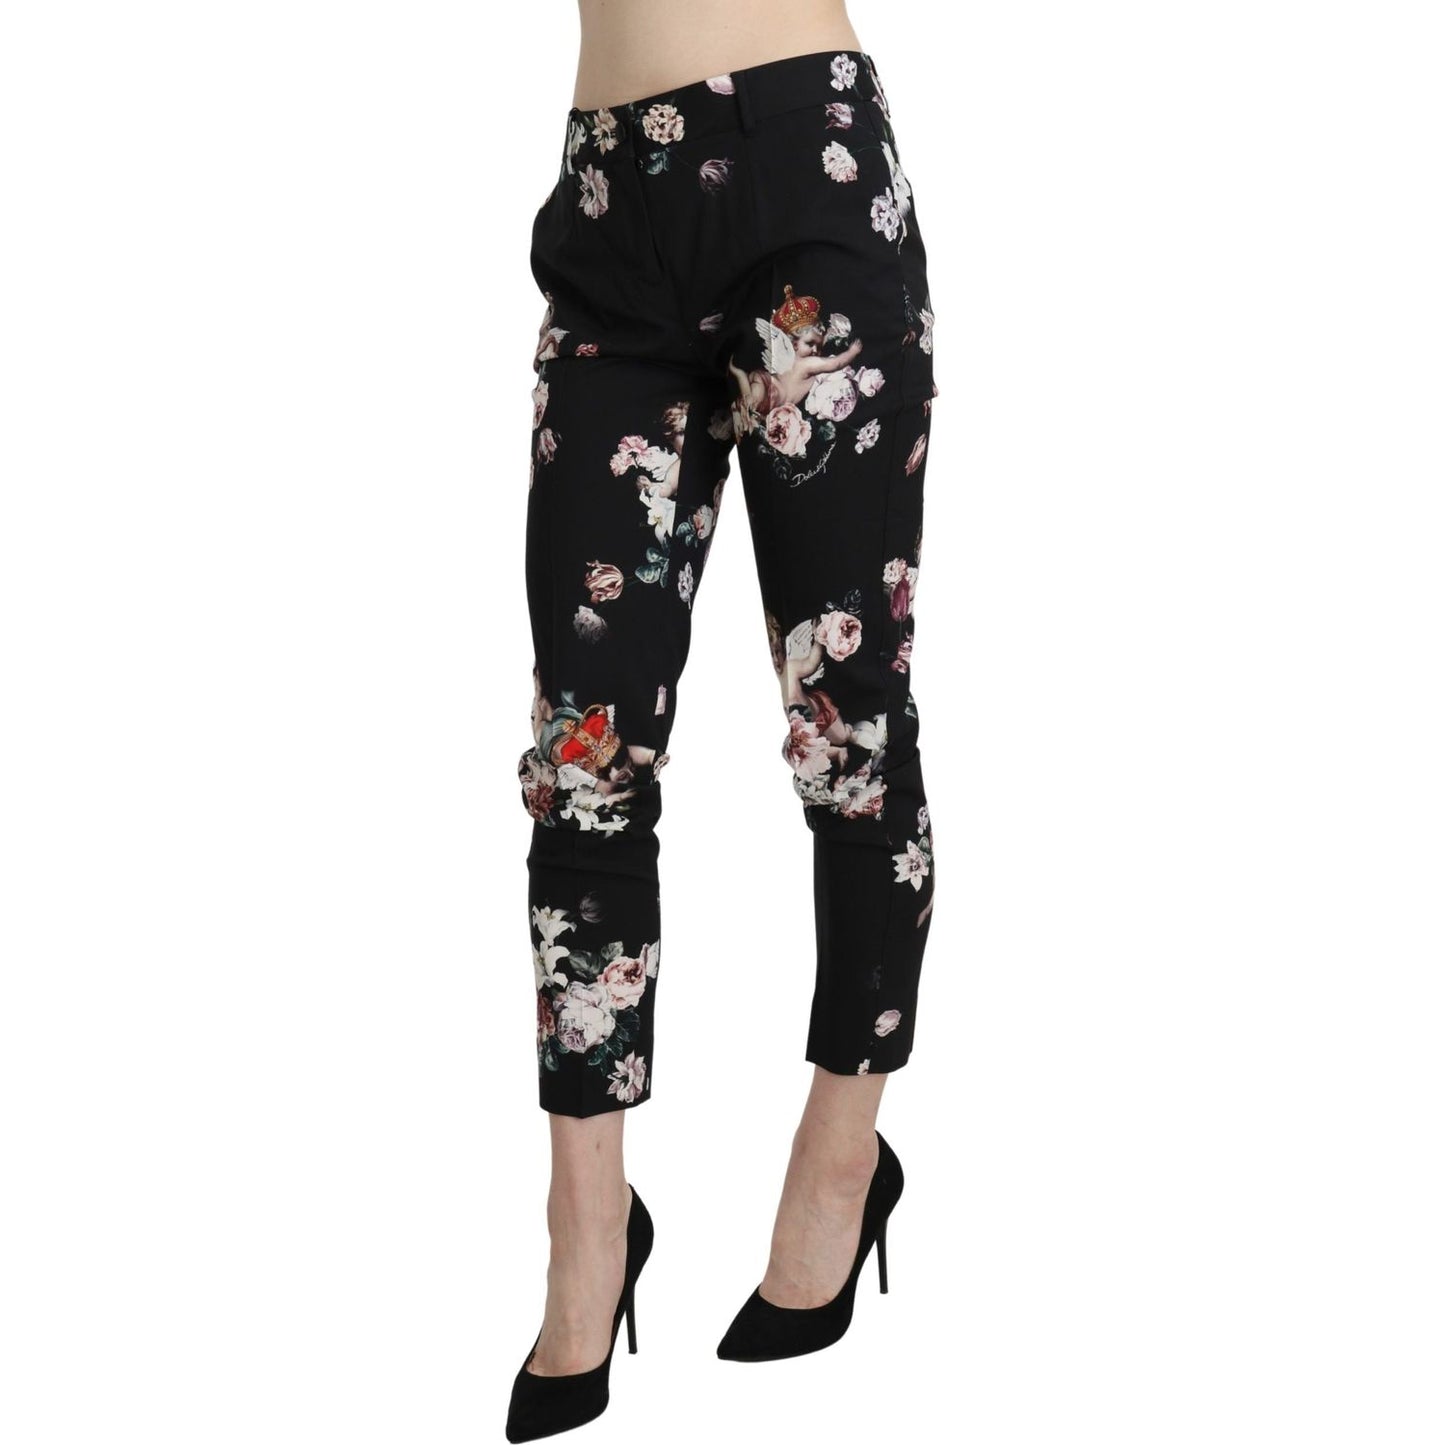 Dolce & Gabbana Elegant High Waist Cropped Trousers Jeans & Pants black-angel-floral-cropped-trouser-wool-pants